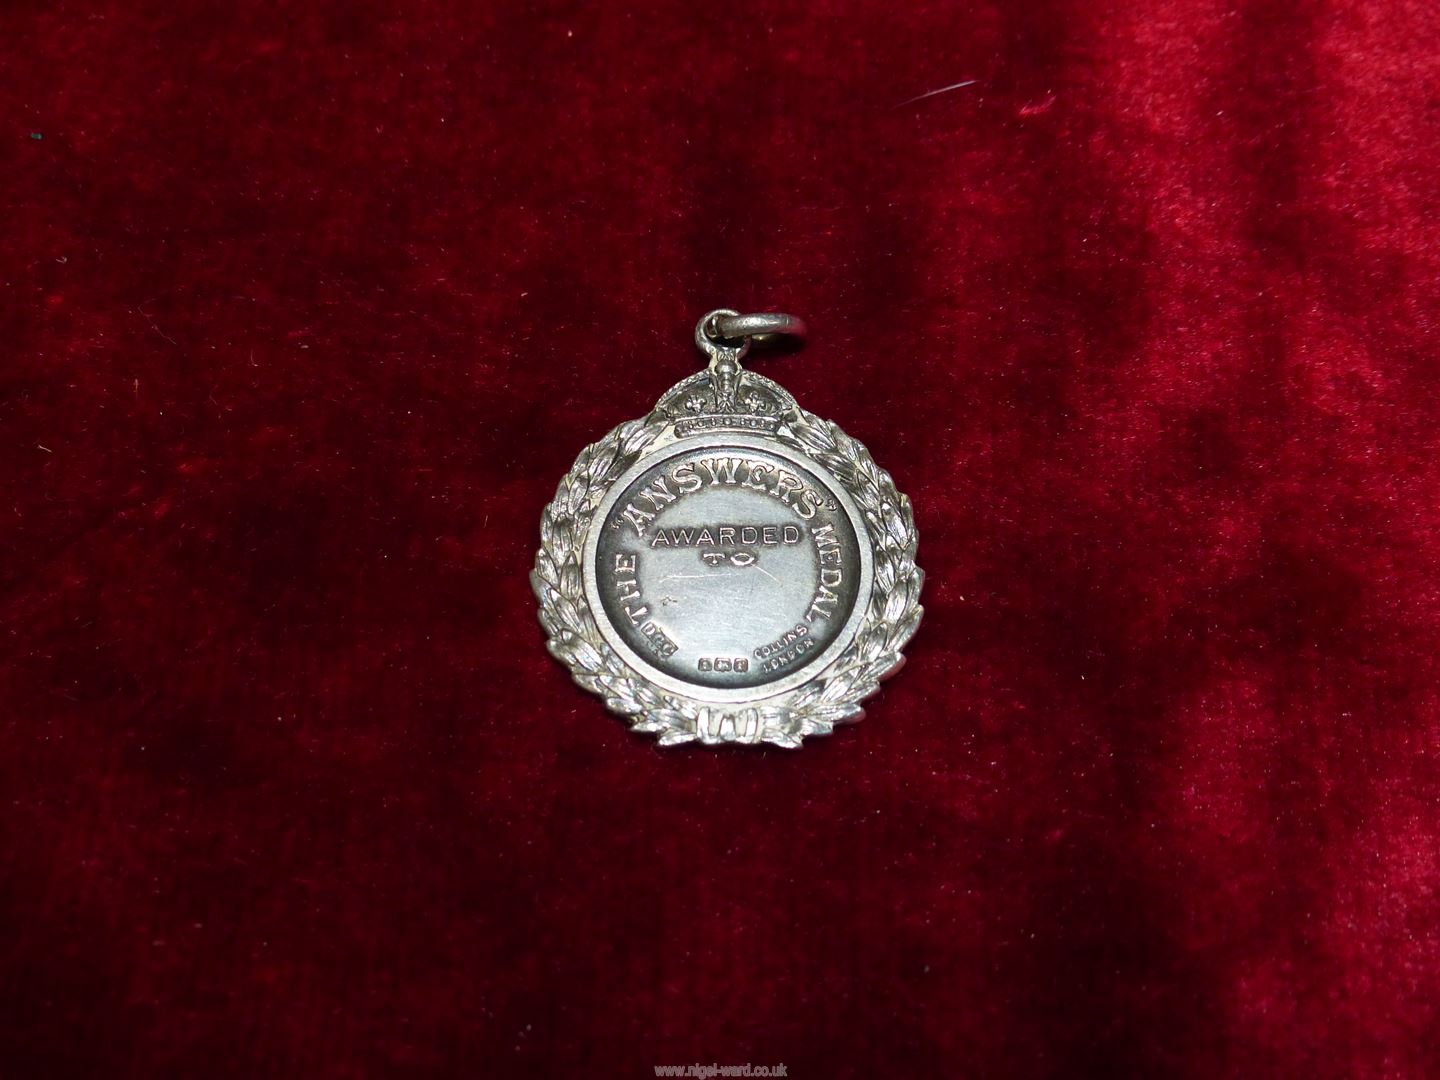 A Silver Medal, "The Answers Medal", Birmingham hallmark, 13.6 gms. - Image 2 of 2